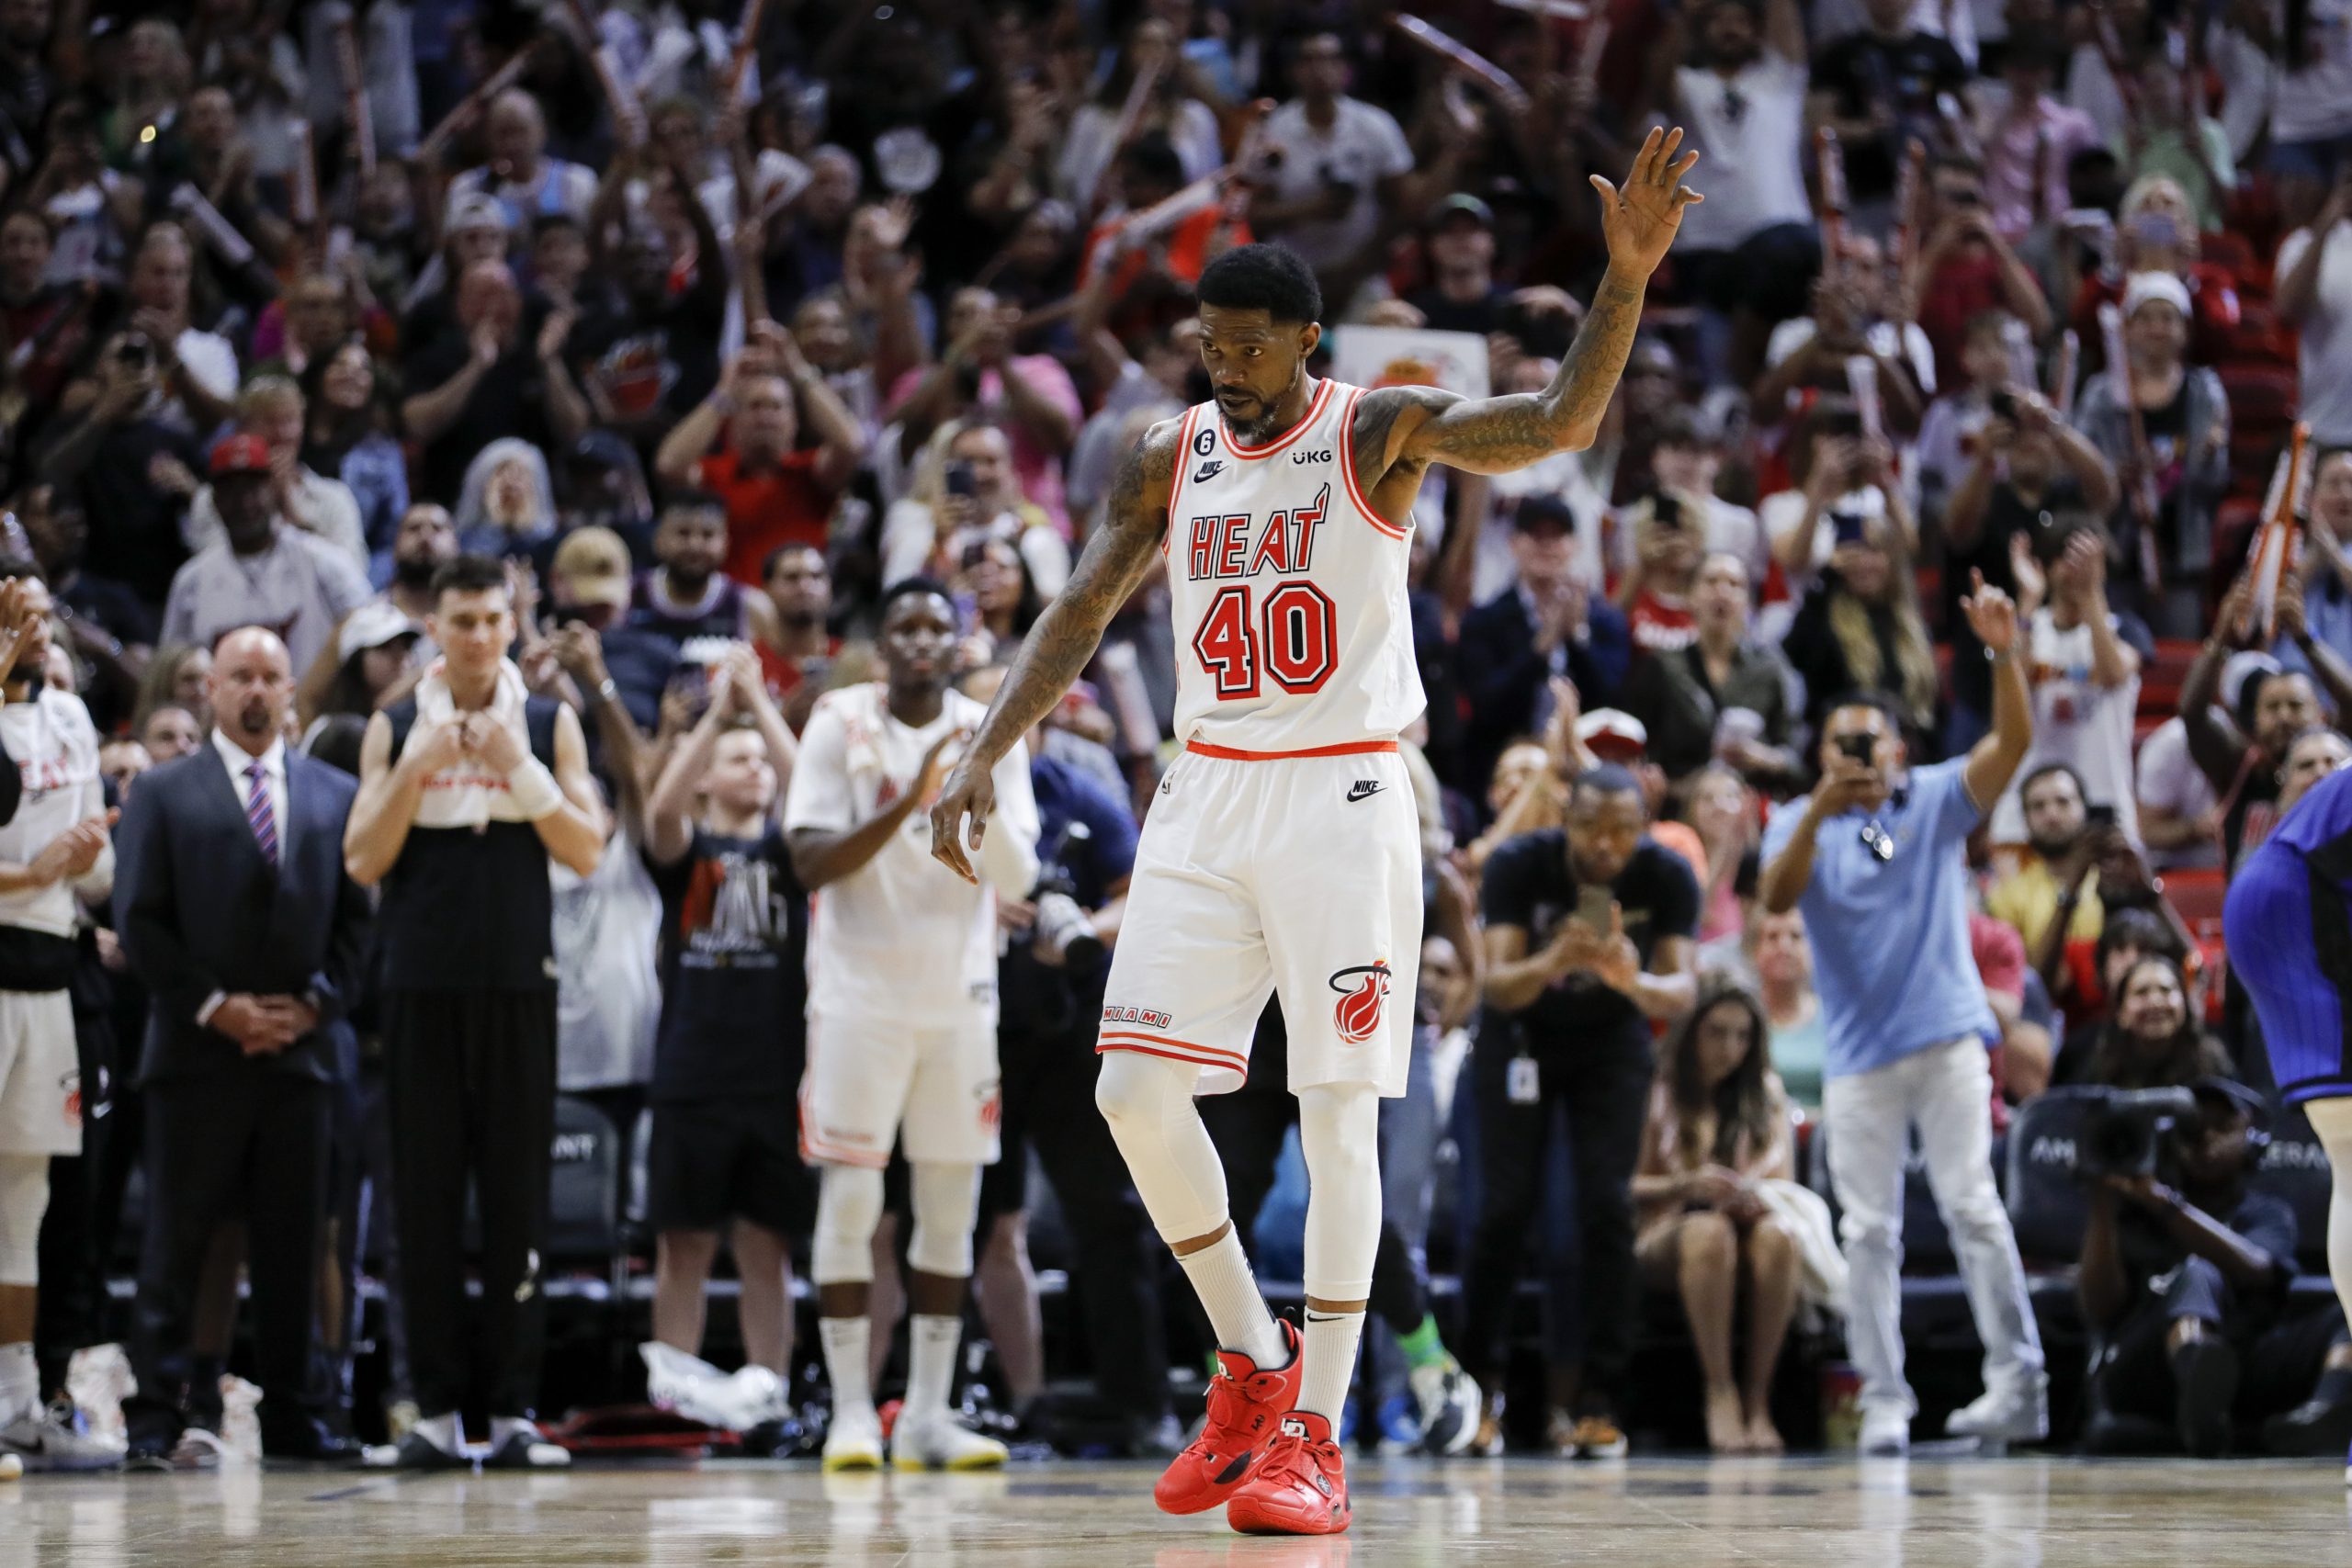 Miami Heat: Can Udonis Haslem become the oldest NBA player ever?